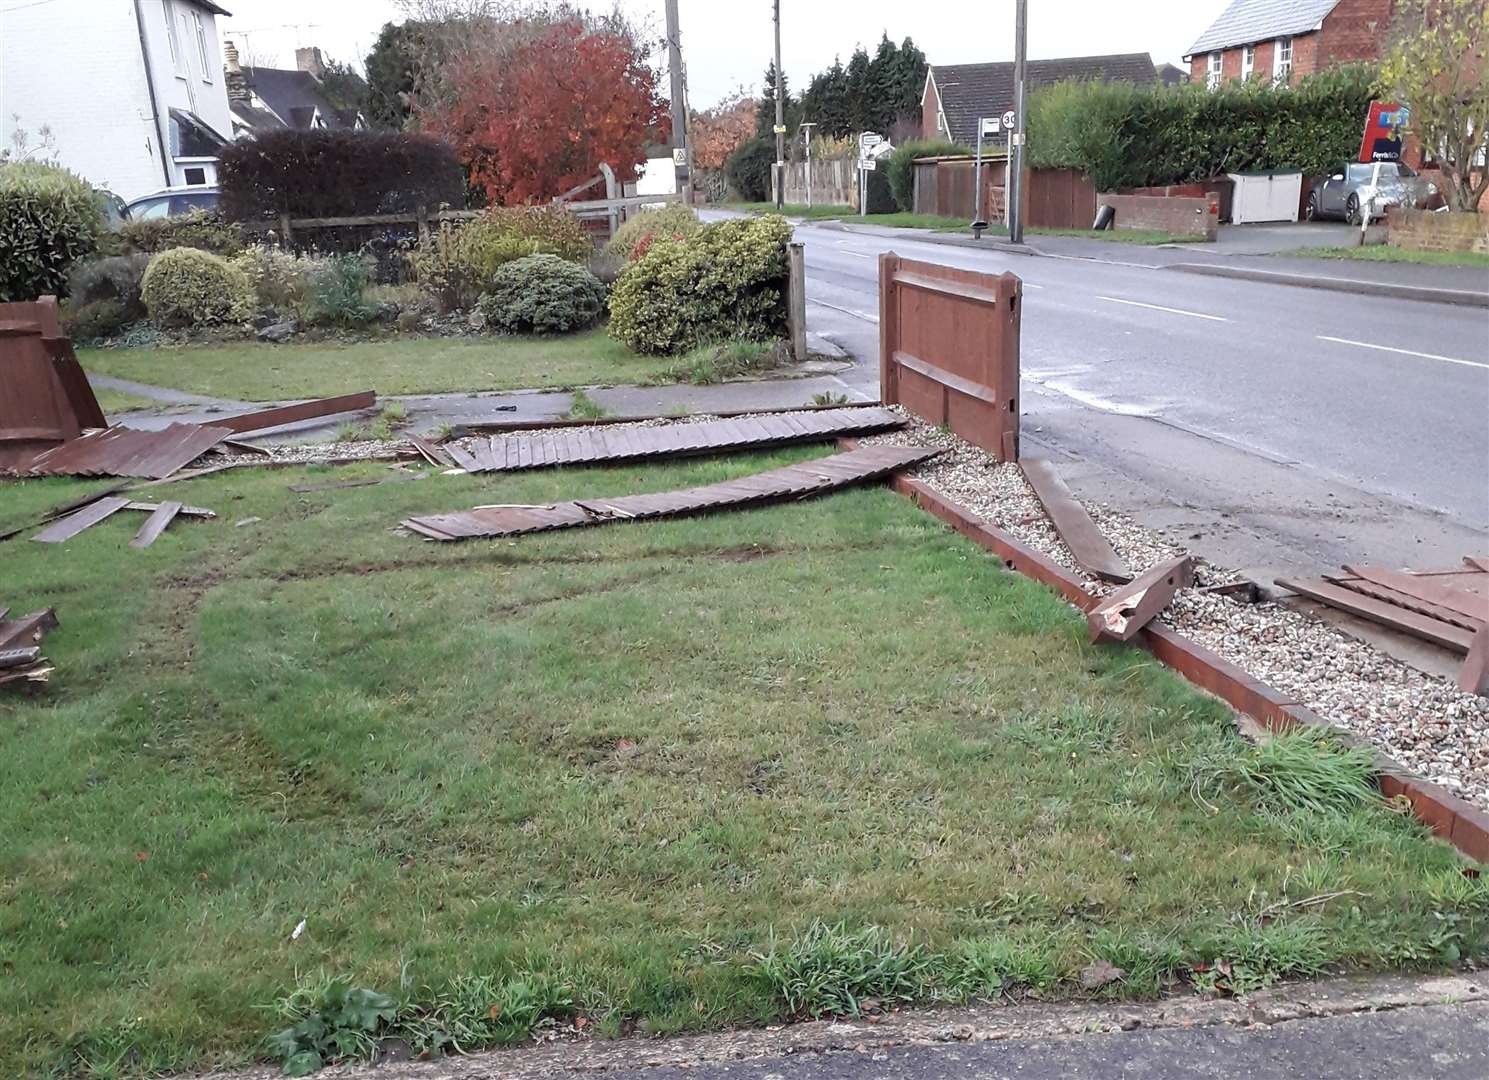 The destruction caused to Mr Gower's fence and the fence belonging to his neighbour